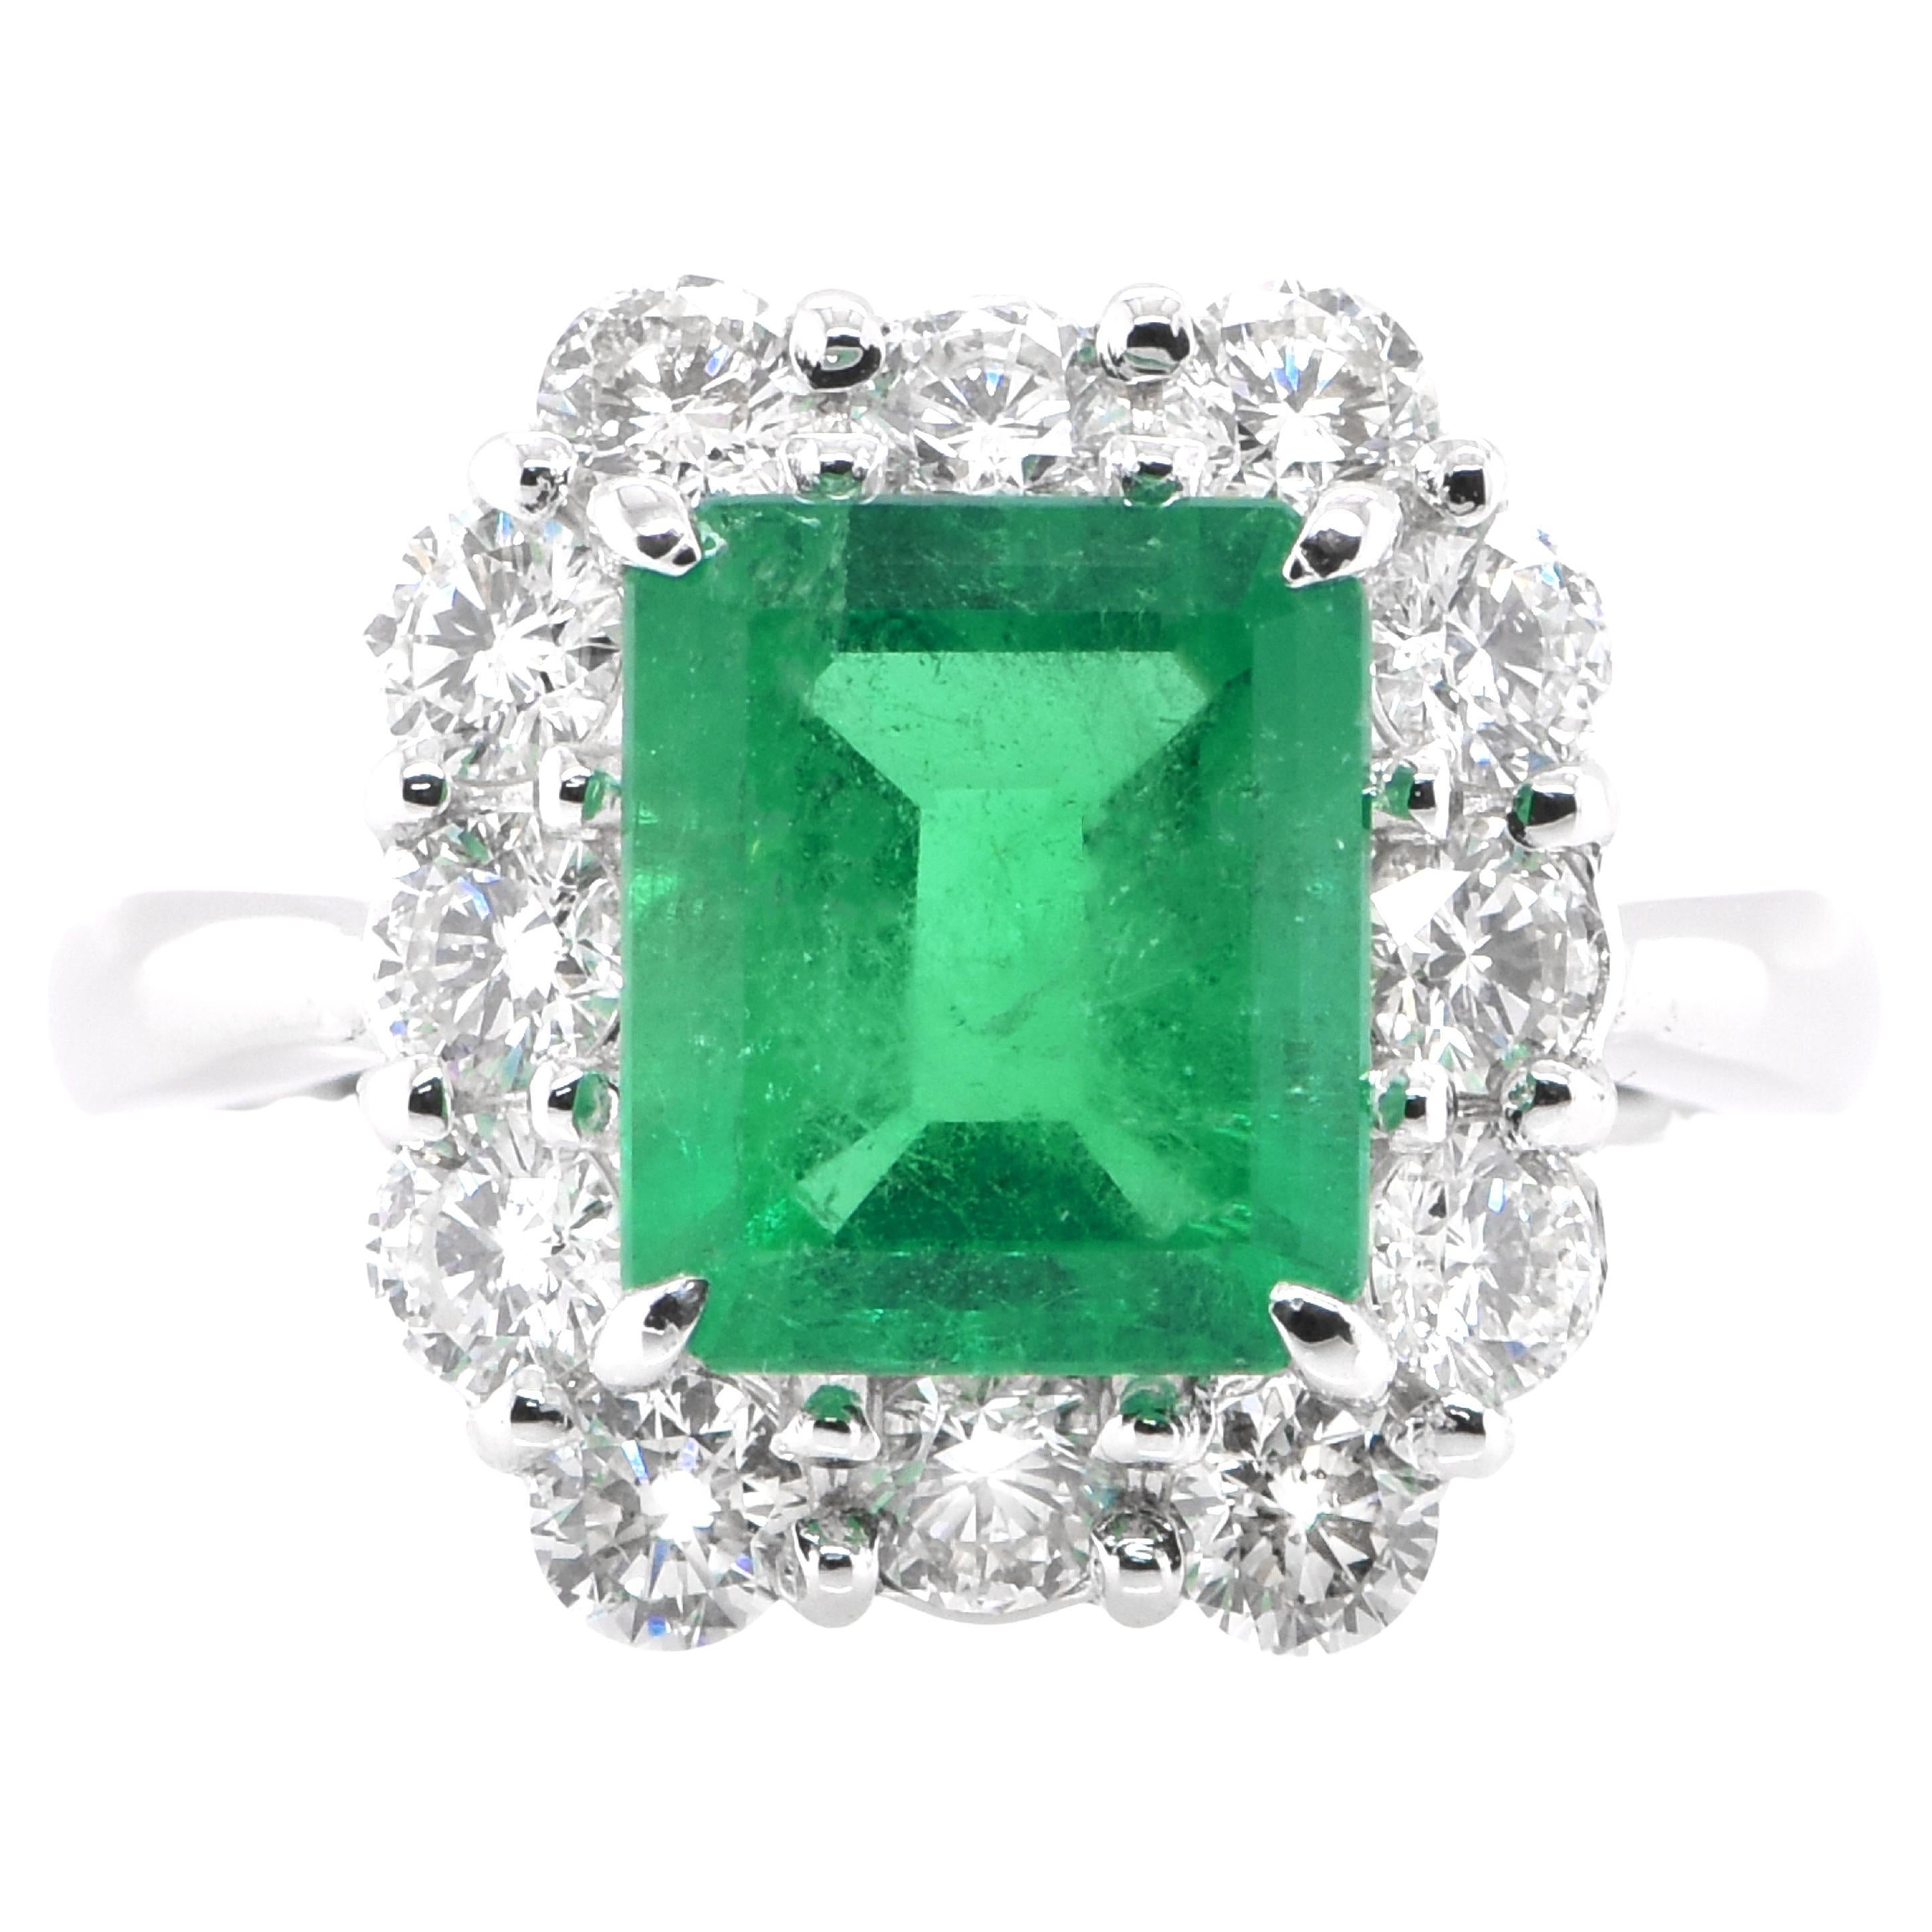 2.36 Carat Natural Colombian Emerald and Diamond Ring Set in Platinum